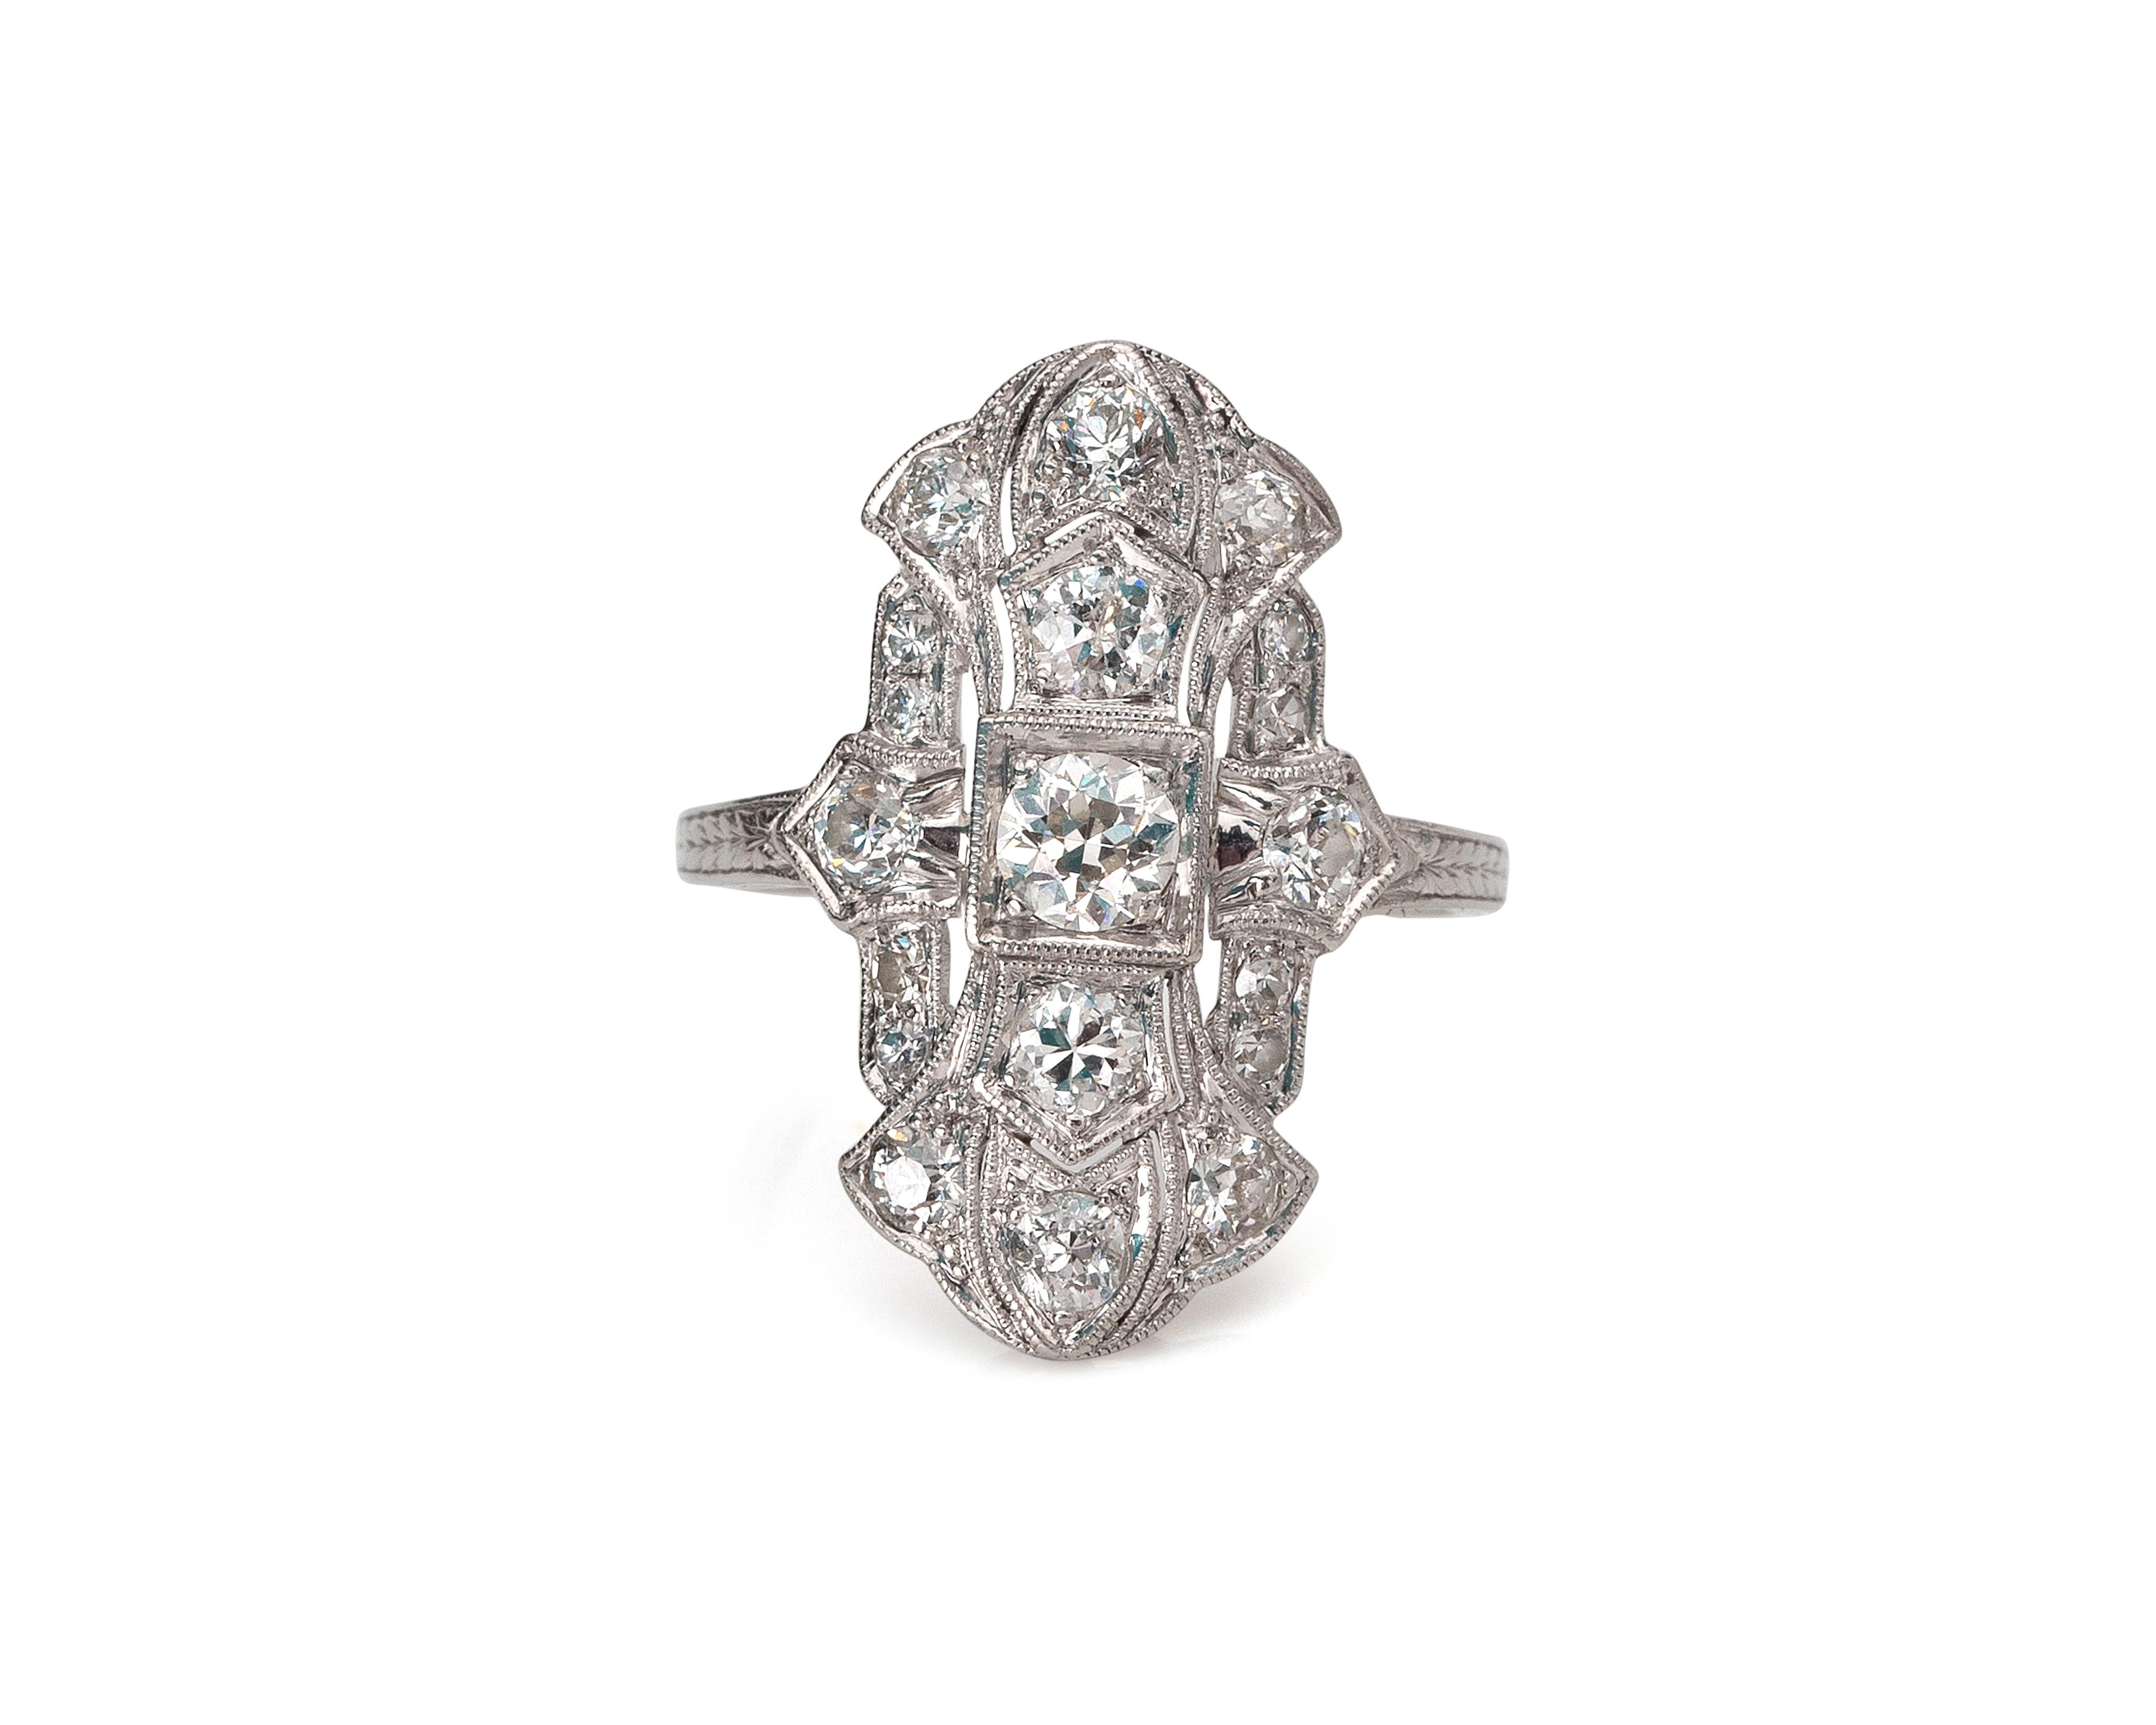 Here we have an excellent example of a 1920's era platinum ring in a classic Art Nouveau style. This stunning shield is crafted in platinum with a total of 1.07 carats of dazzling old cut diamonds adorning the stylish curvaceous ring. This ring is